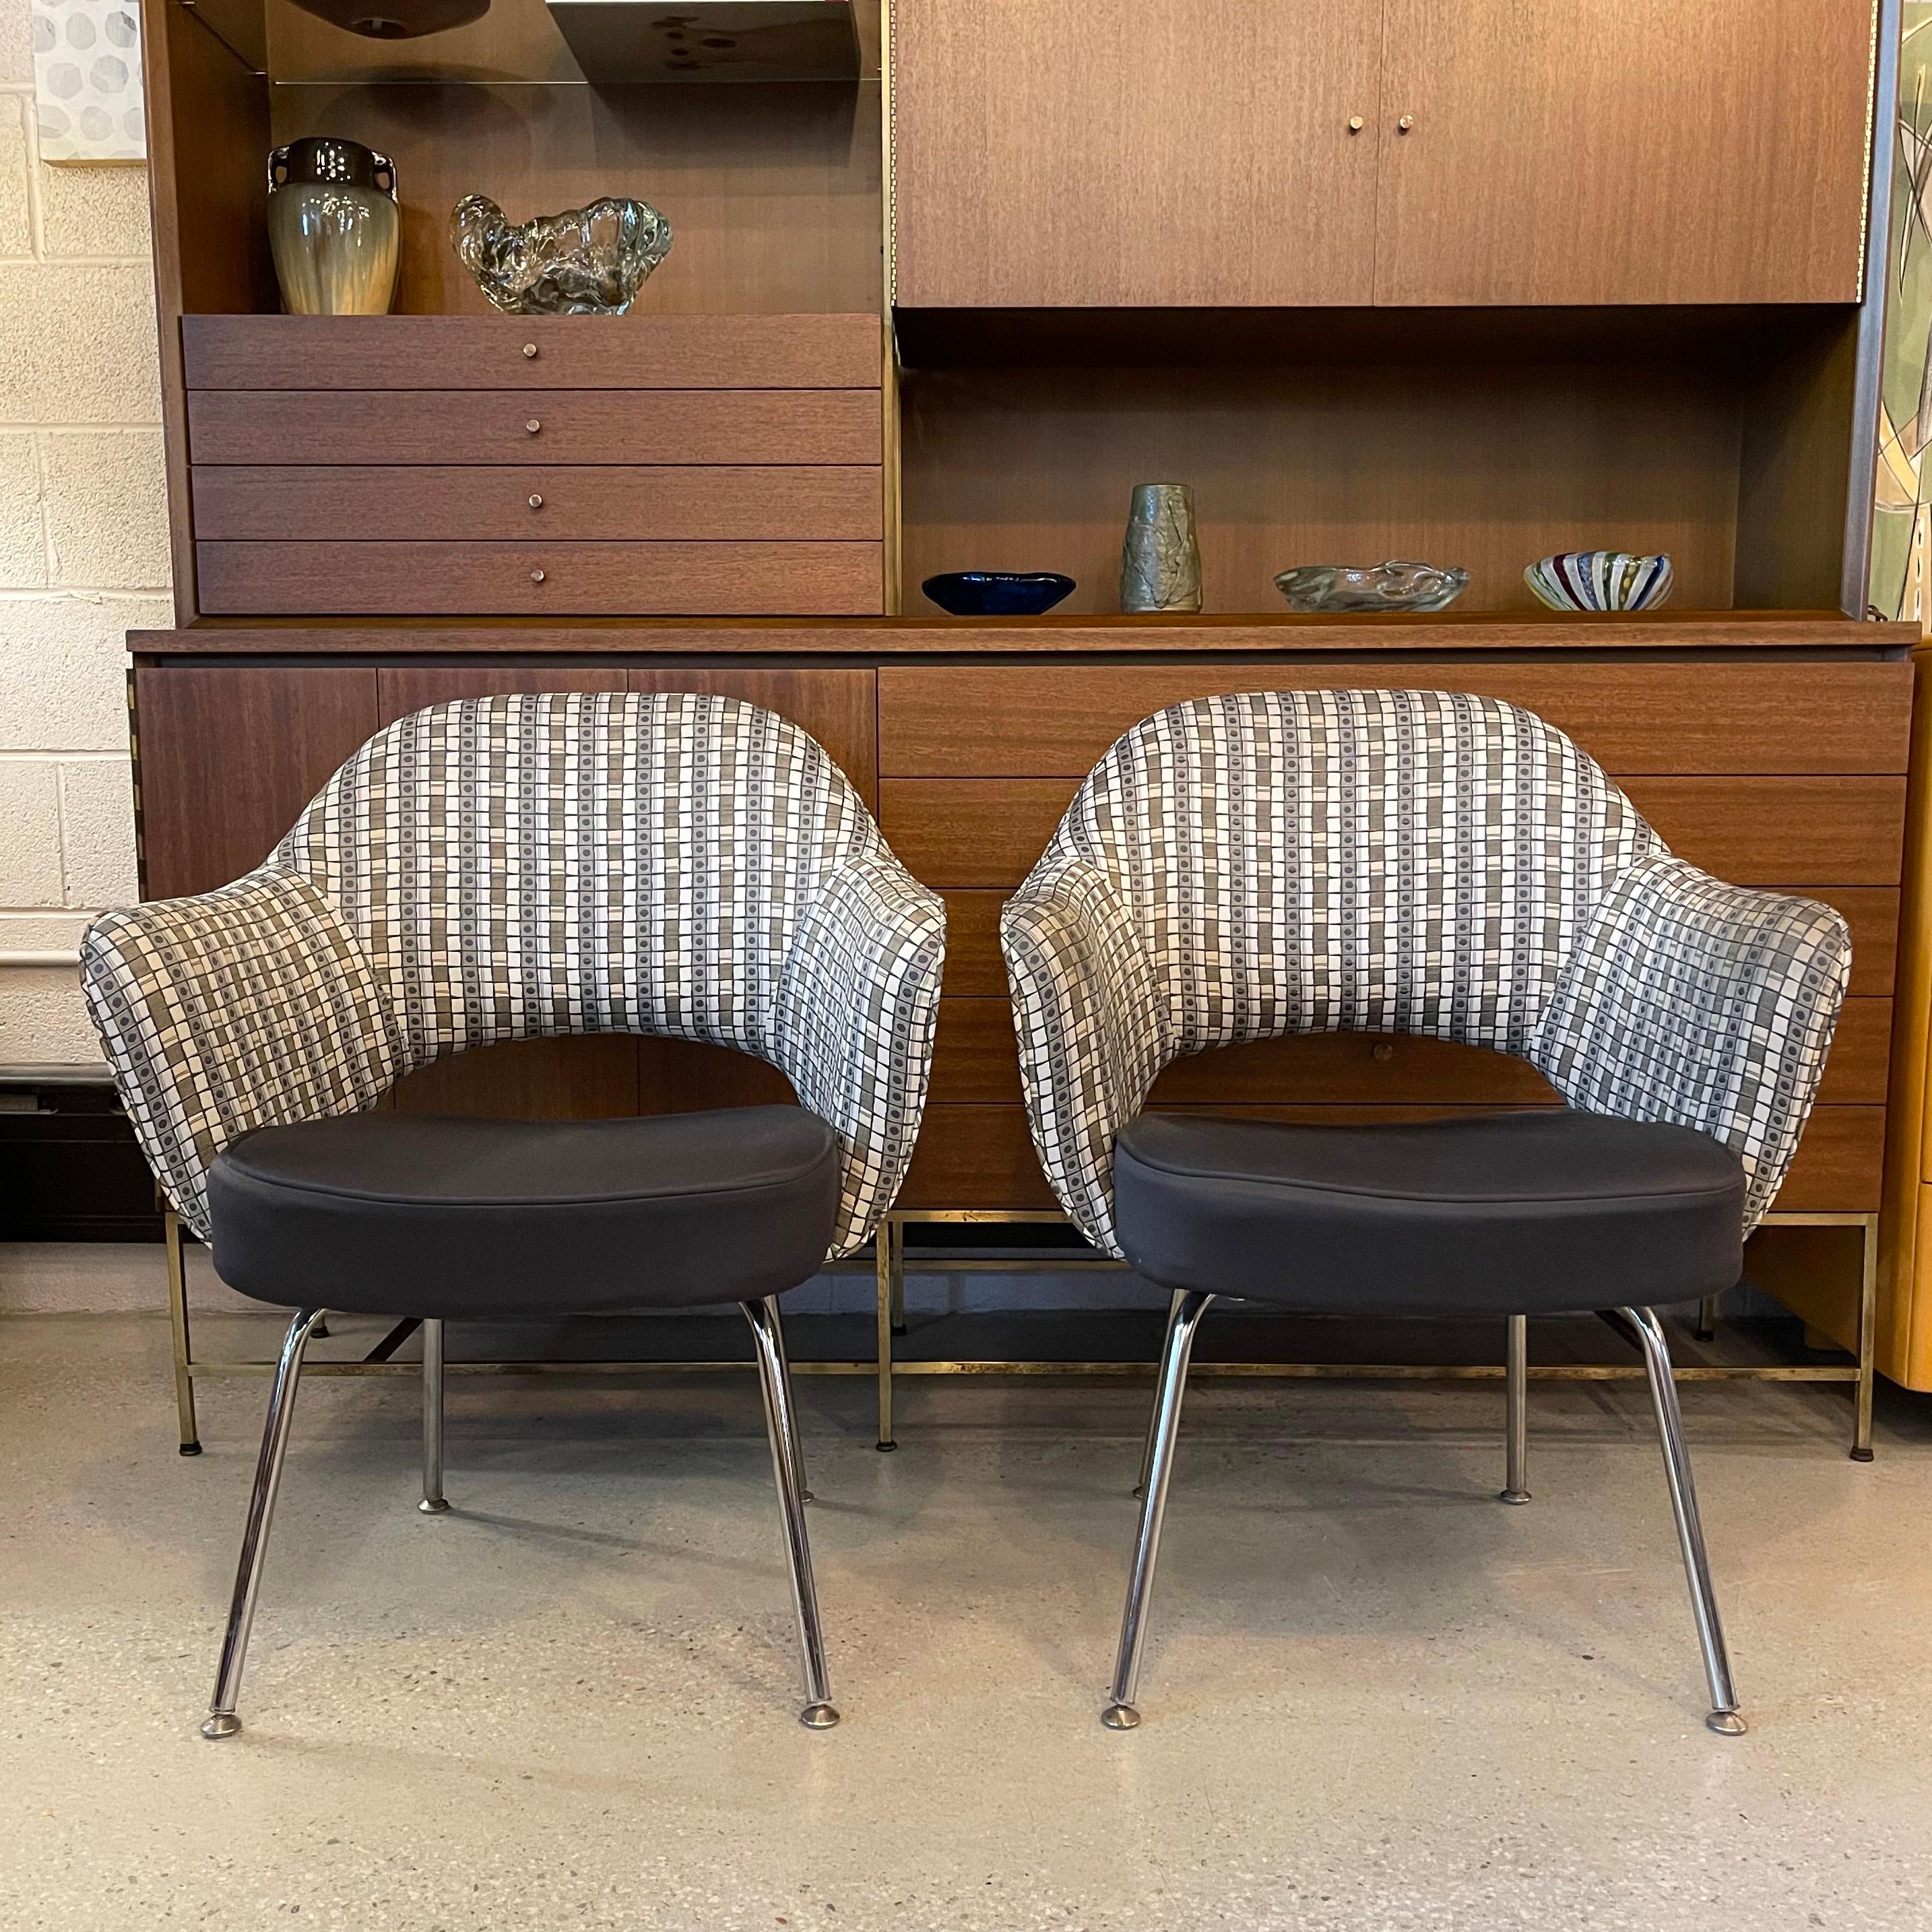 Pair of executive armchairs by Eero Saarinen for Knoll feature black nylon seats with contrasting geometric print backs. These iconic chairs are extrememly comfortable and are the epitome of mid-century modern design. 